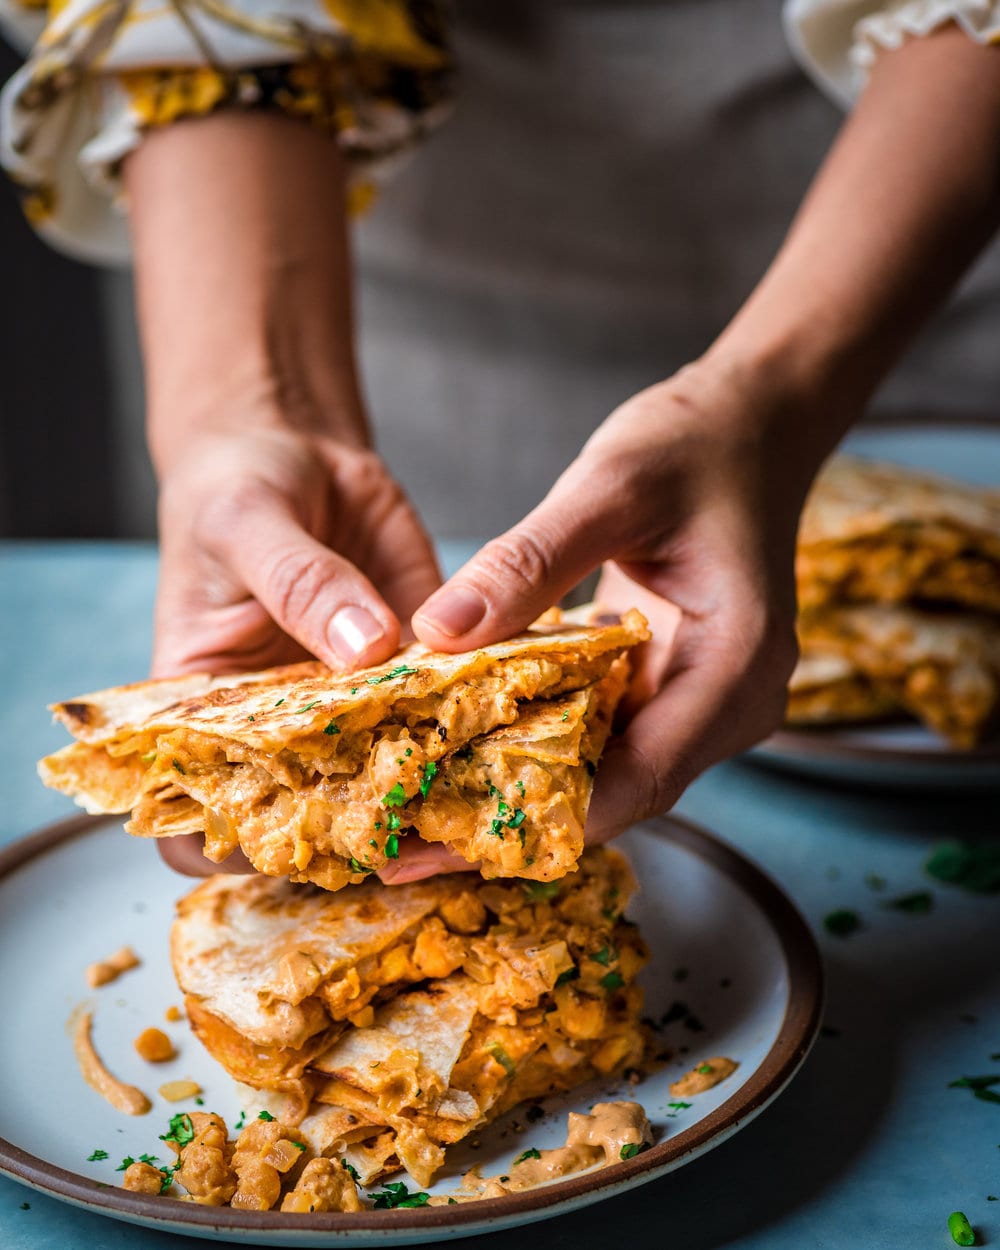 Woman holding a quarter of a buffalo chickpea quesadila over a plate with the rest of the quesadilla.